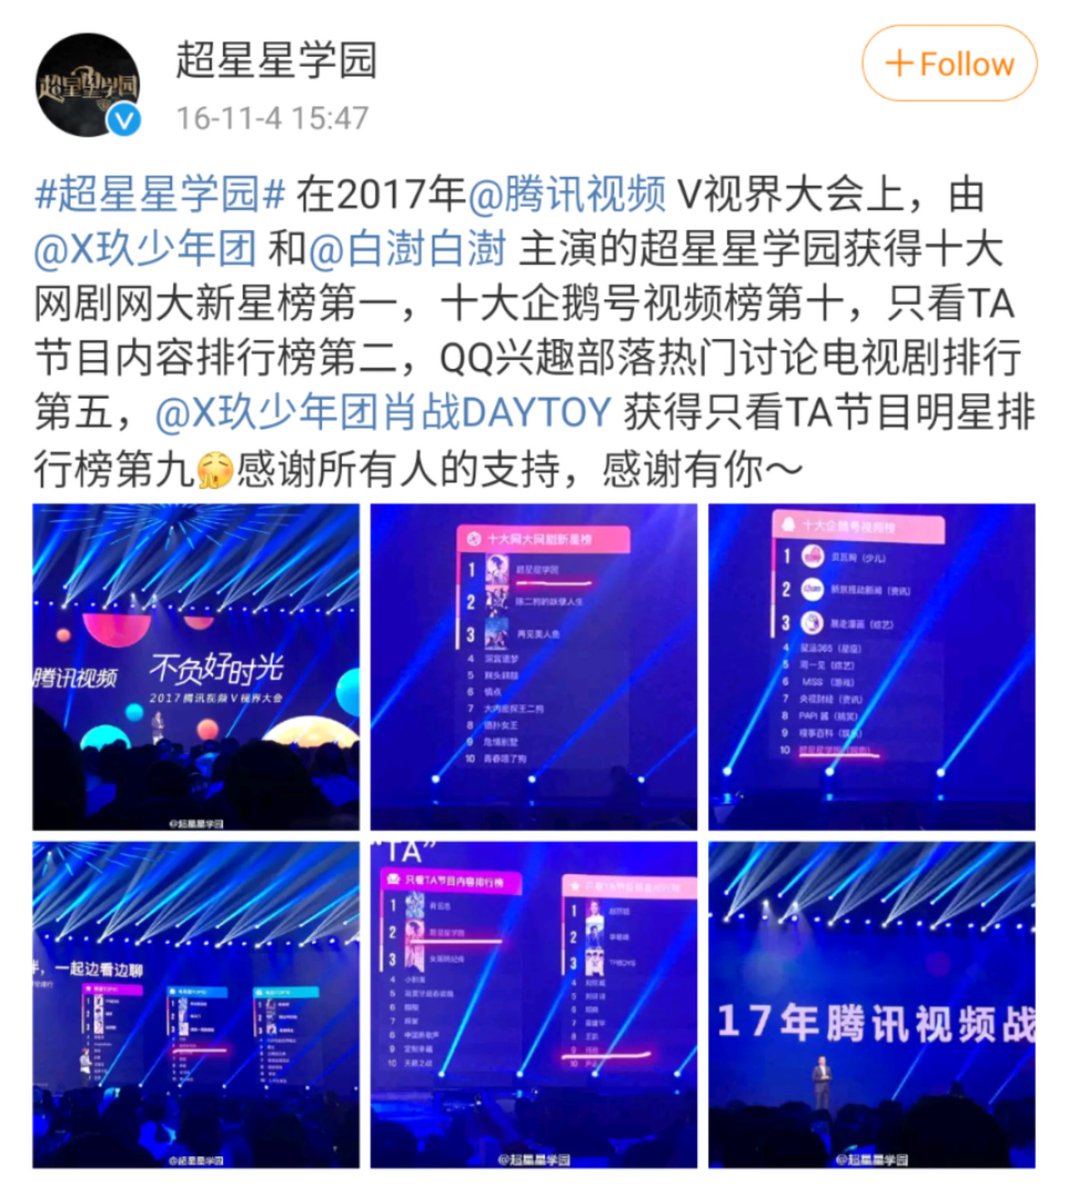 Superstar Academy: 29 Sep 2016On 4 Nov 2016, the drama Weibo concludes their results in Tencent's 2017 V Vision Event. The drama was #1 in the New Star Web Drama Chart. Xiao Zhan was #9 in the "Watch Him Only" app function. Also, Superstar Academy hits 800m views on 7 Nov 2016.